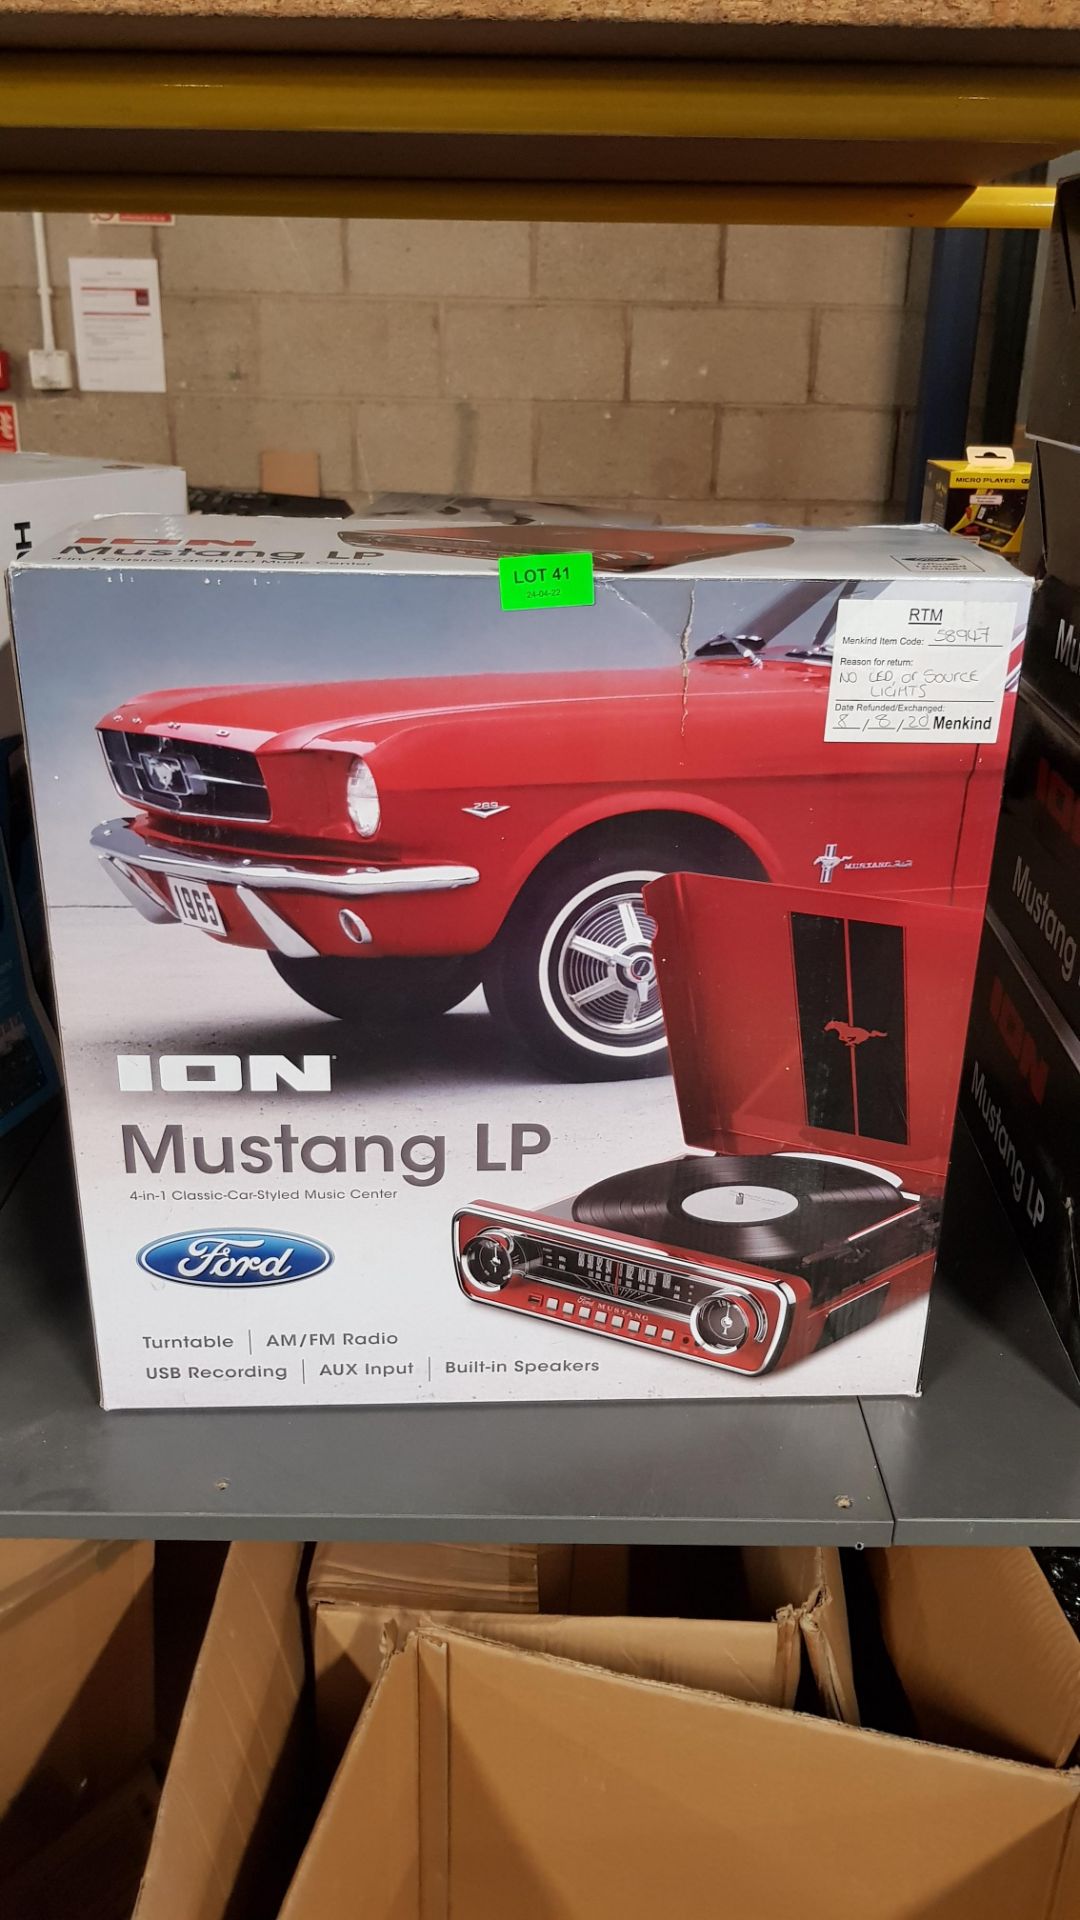 (8B) RRP £99.99. ION Ford Mustang LP. 4 in 1 Classic Car Styled Music Center. (Unit Has Return To M - Image 7 of 7